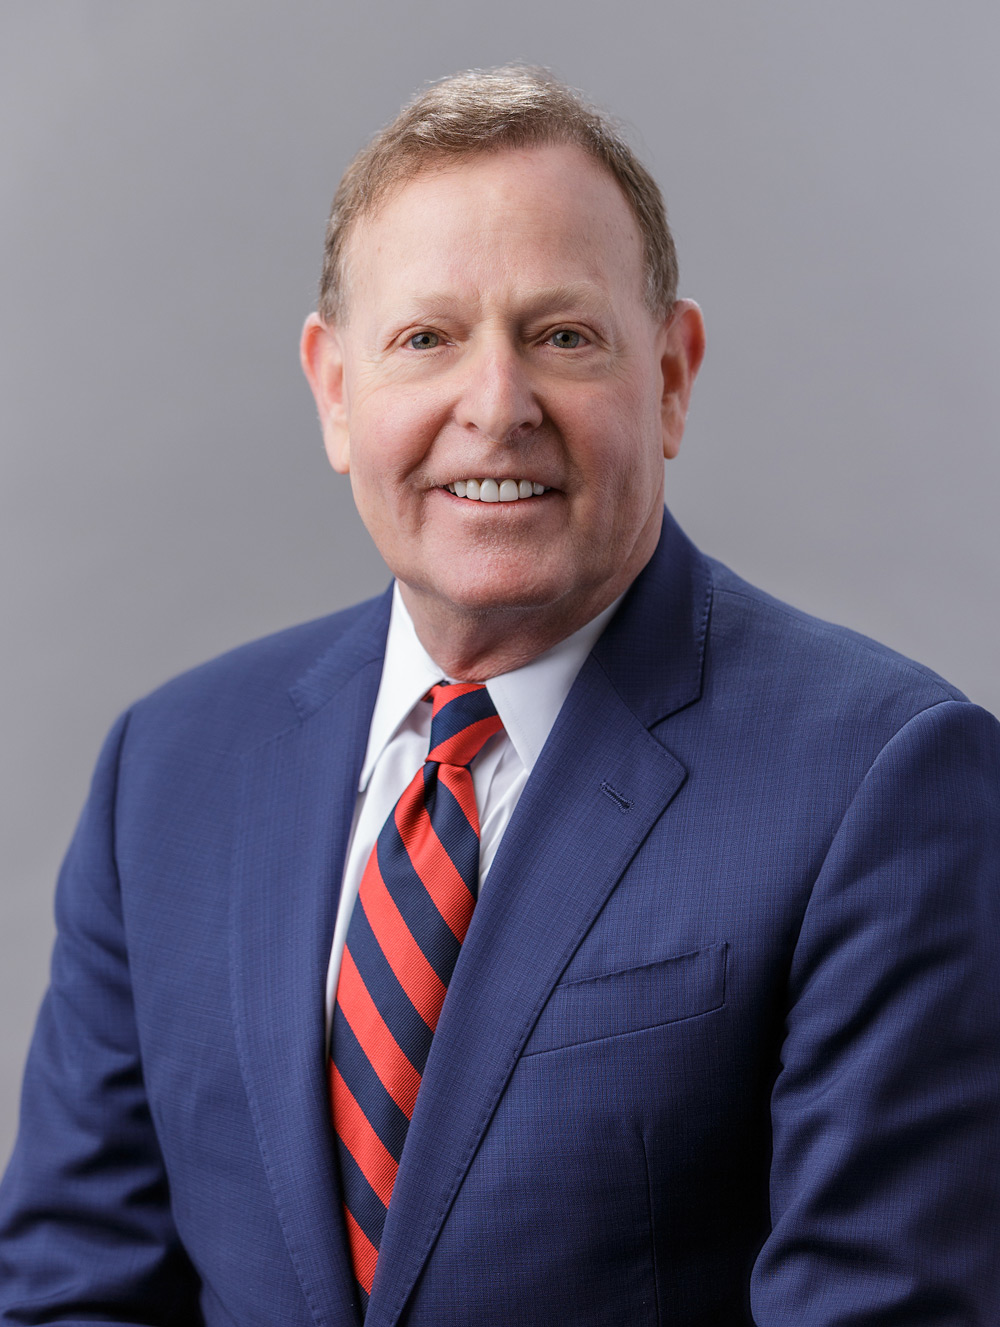 photo of Dr. Robert A. Barish in a blue jacket with a red and blu striped necktie, smiling